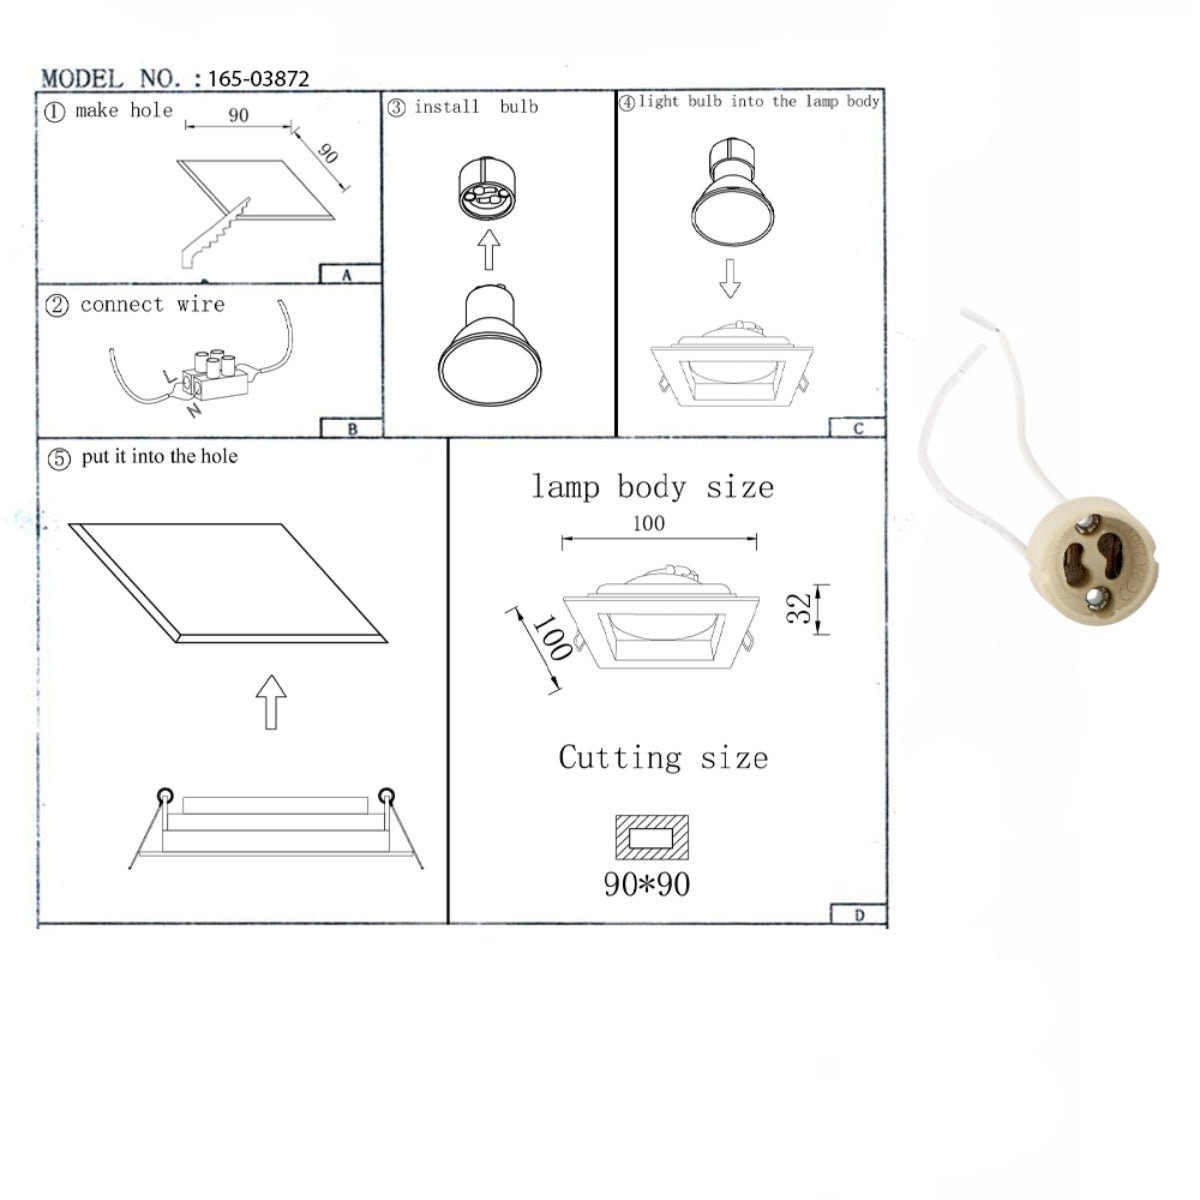 User manual for Grille Square Recessed Tilt Downlight White with GU10 Fitting | TEKLED 165-03872